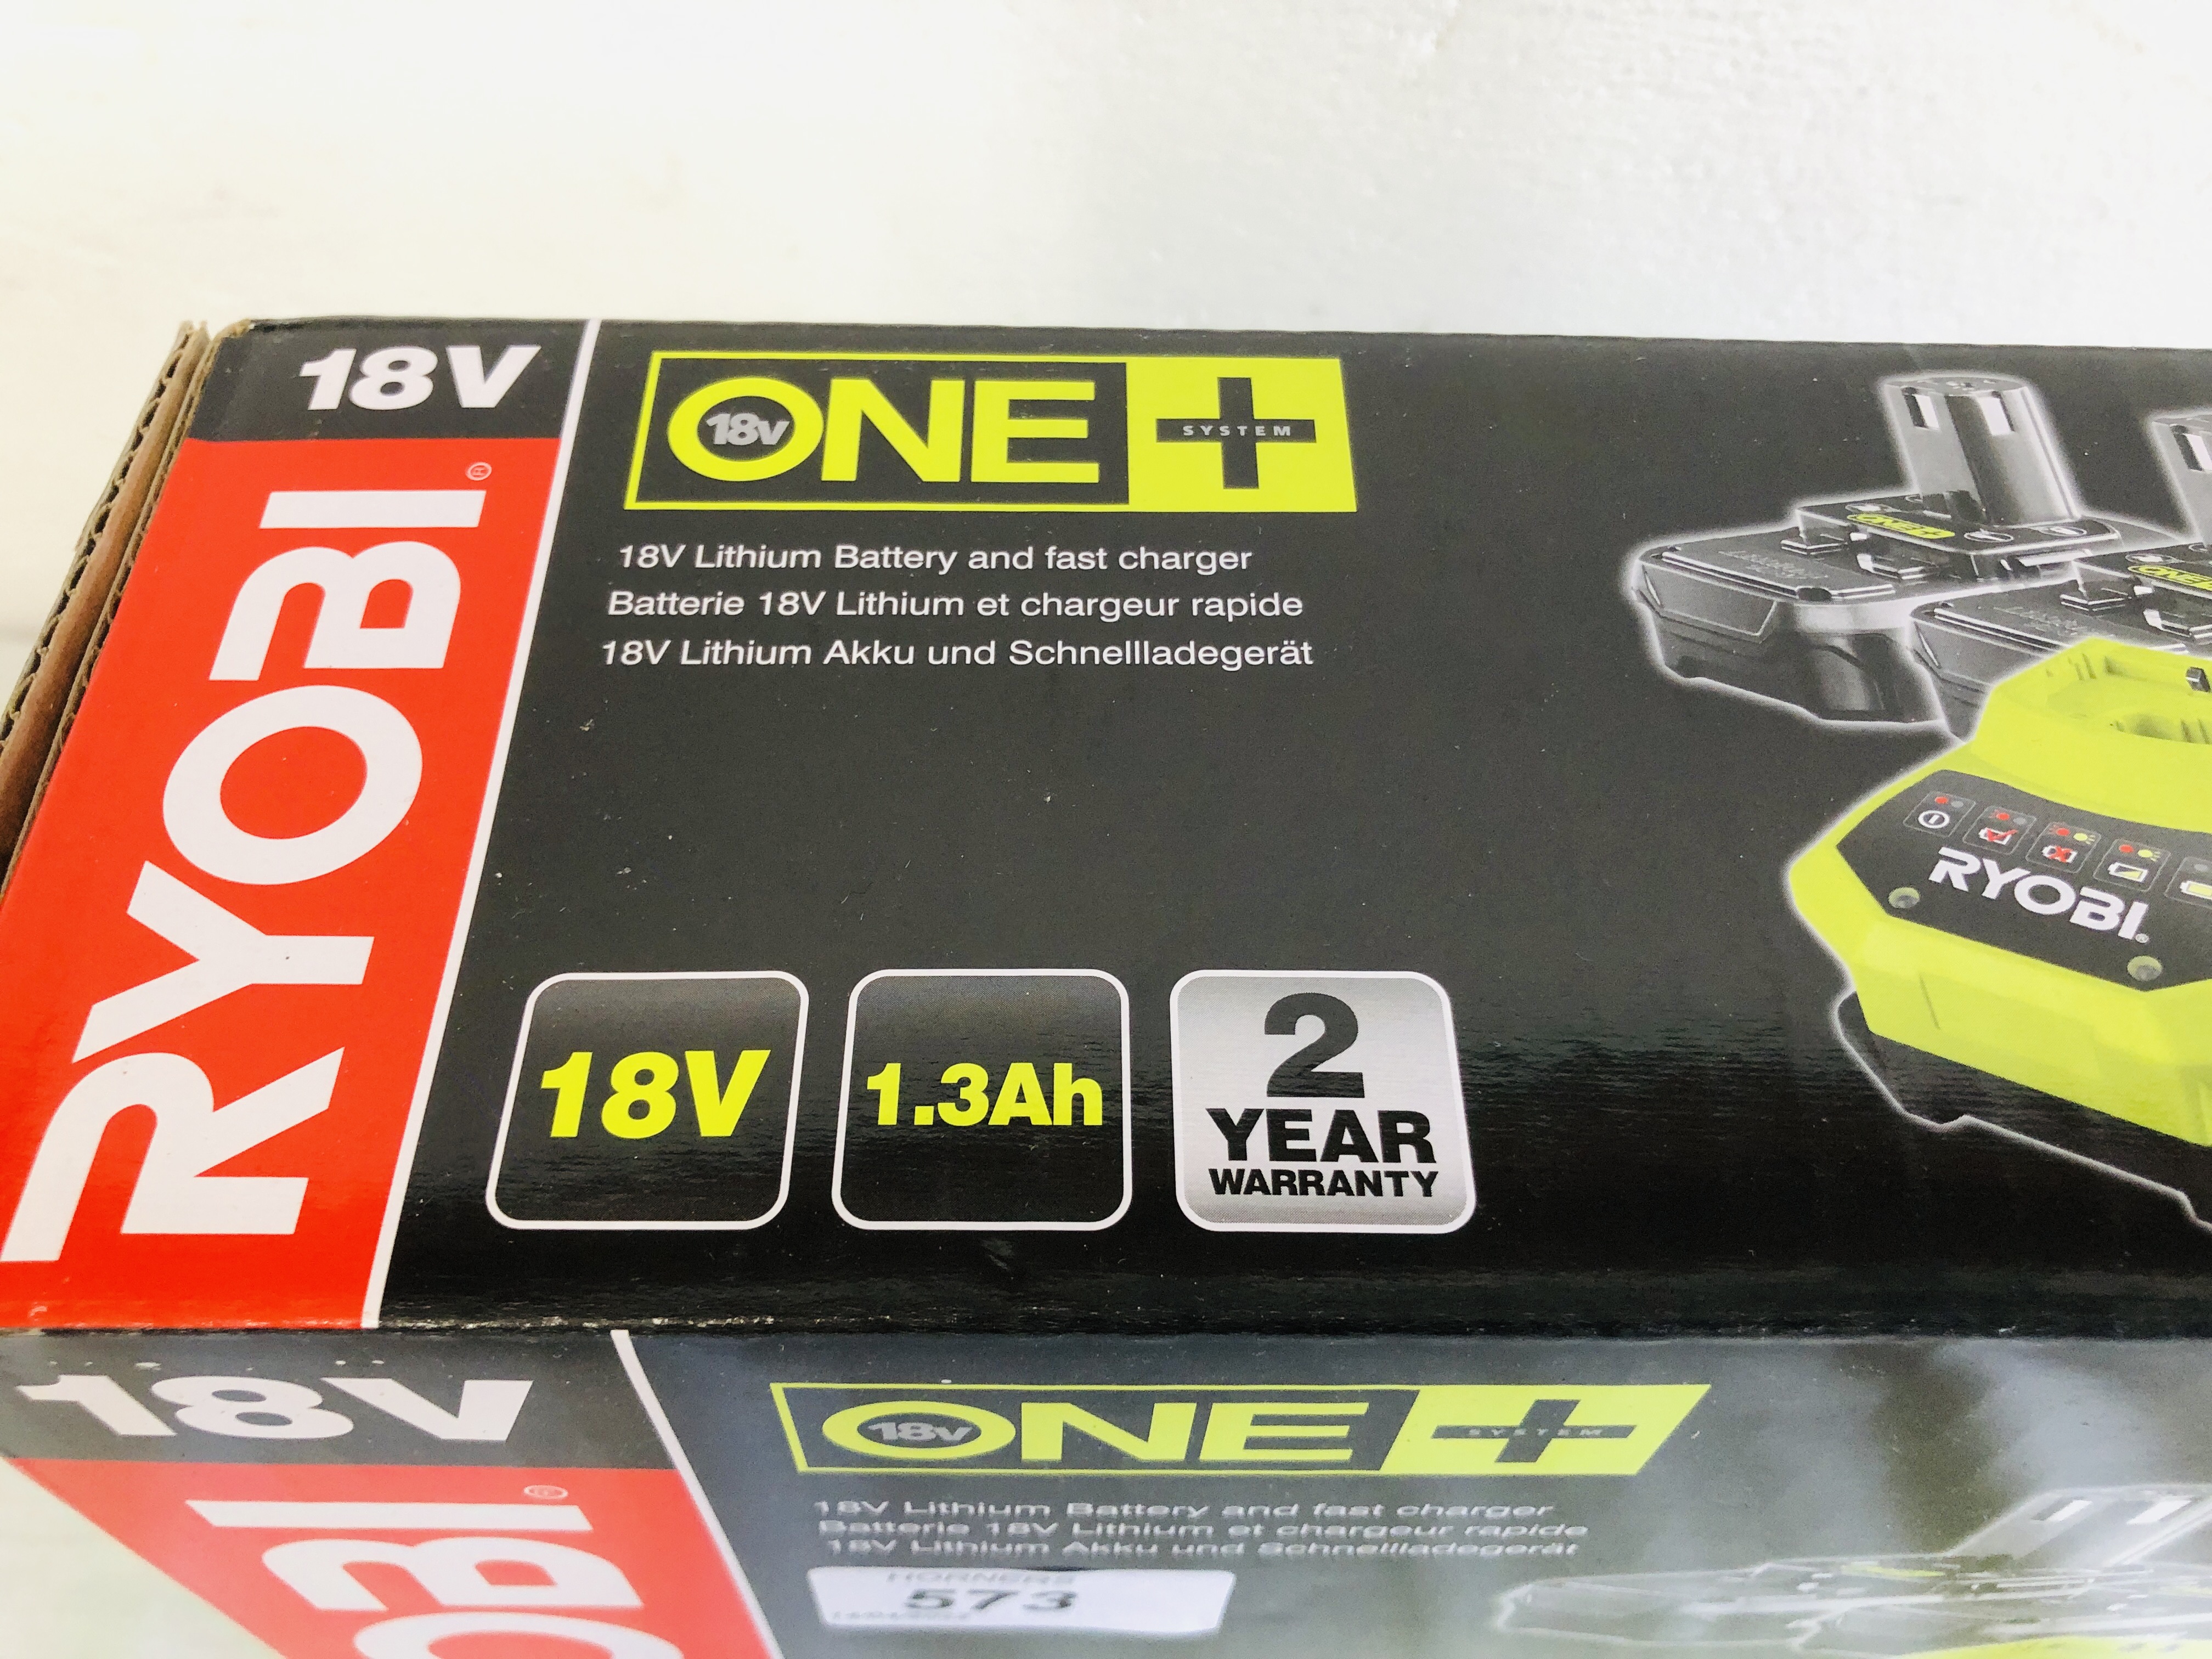 RYOBI 18 VOLT ONE+ 2X1.3AH 18 VOLT BATTERY PACK AND CHARGER (BOXED AS NEW) - SOLD AS SEEN. - Image 2 of 2